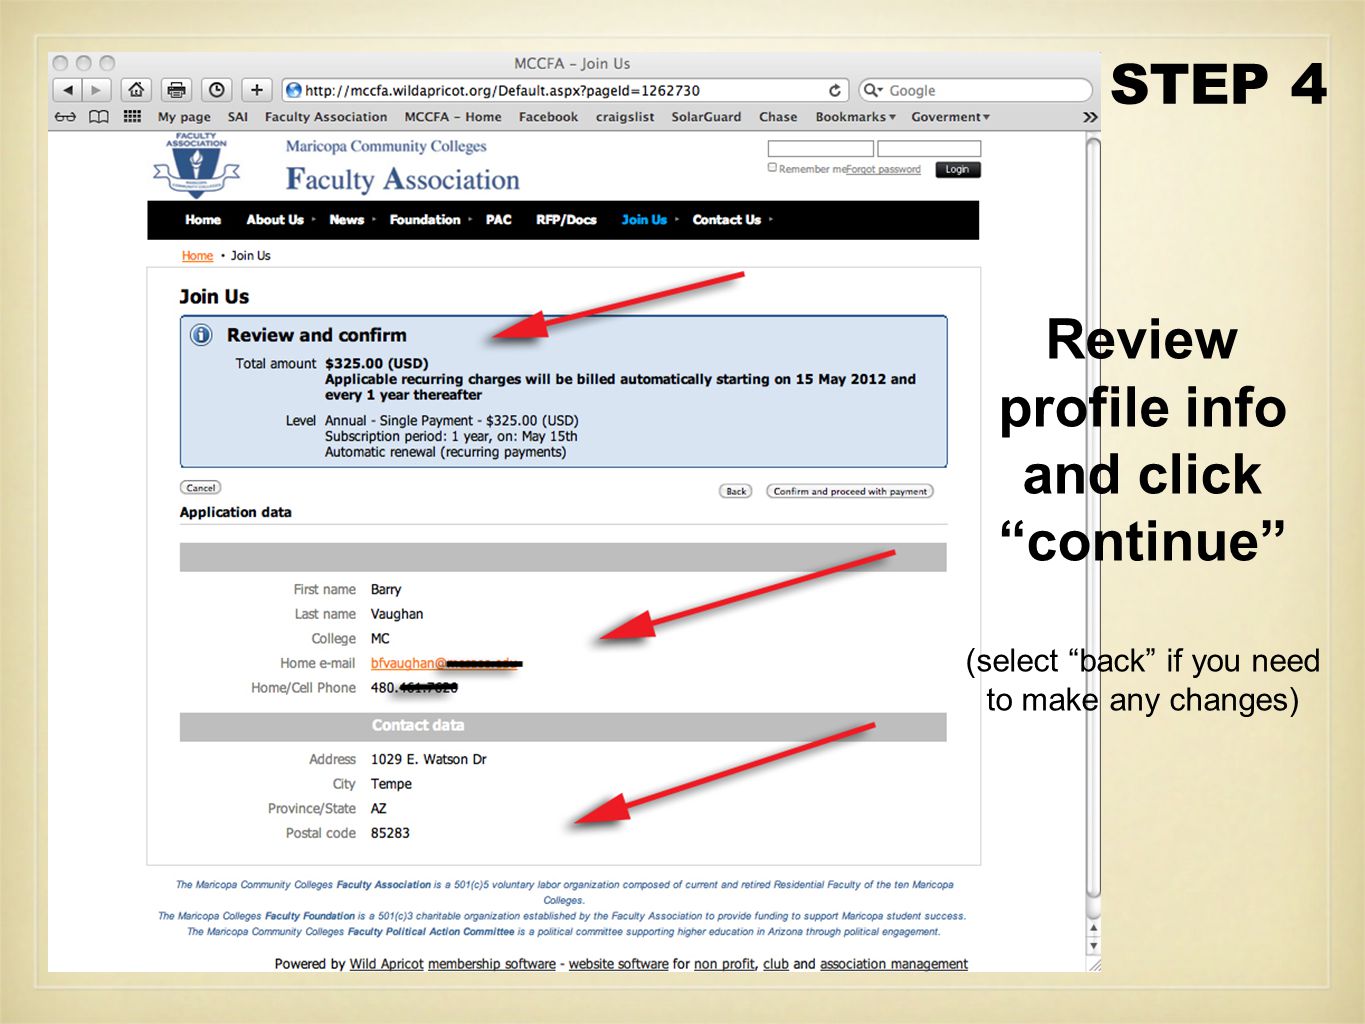 Review profile info and click continue (select back if you need to make any changes) STEP 4